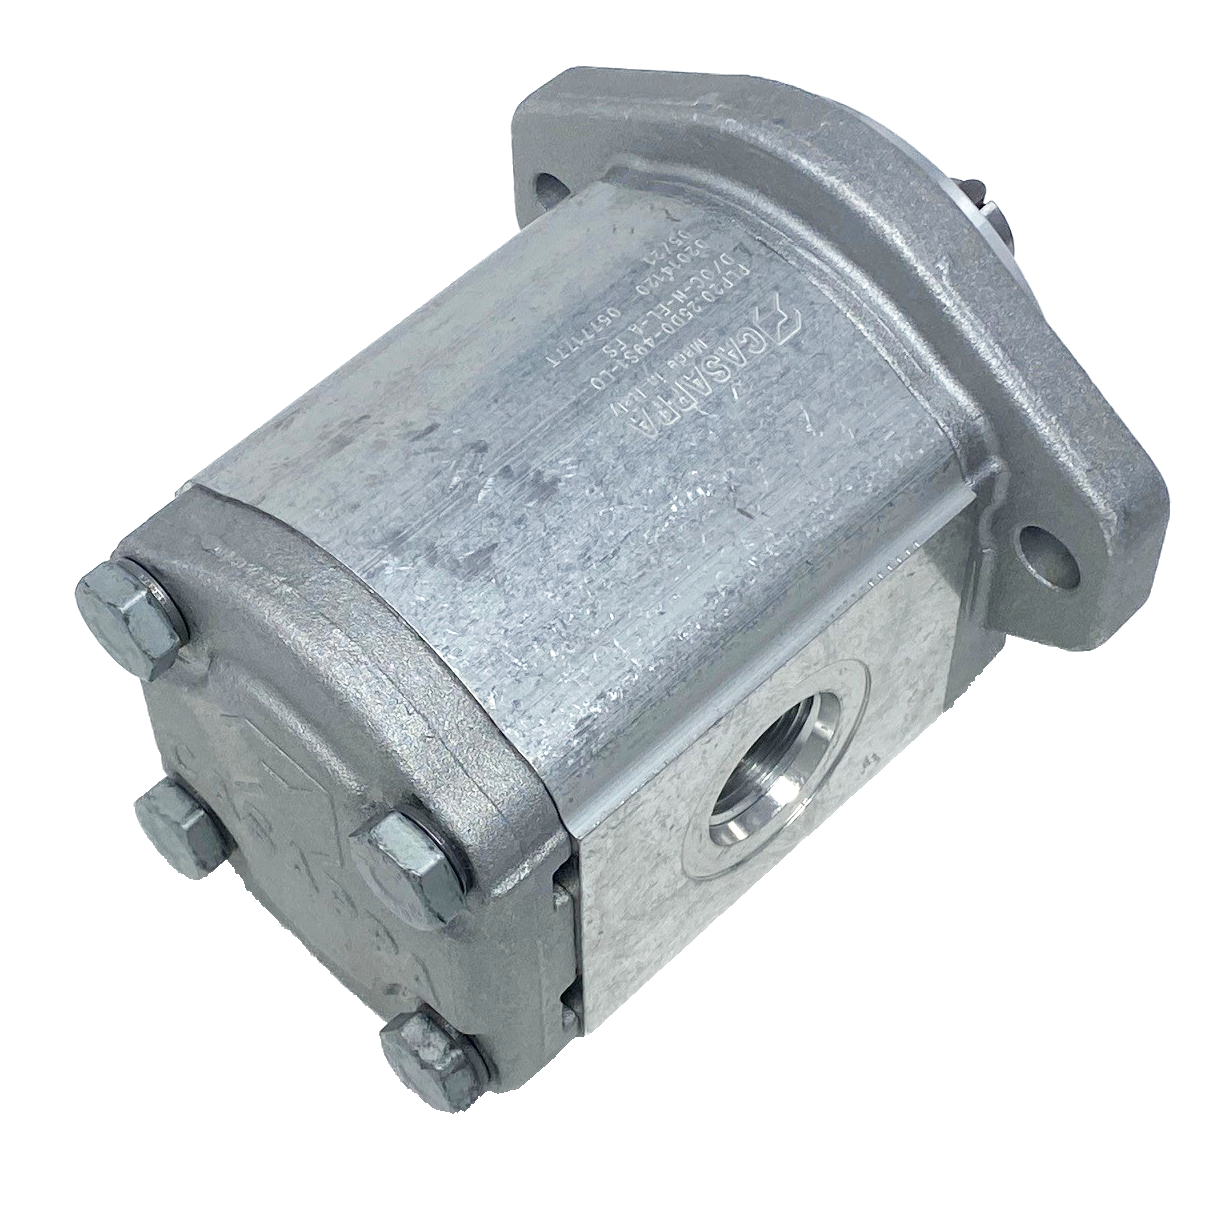 PHP20.25S0-50S9-LOG/OC-N-EL : Casappa Polaris Gear Pump, 26.42cc, 3335psi Rated, 3000RPM, CCW, 3/4" Bore x 3/16" Key Shaft, SAE A 2-Bolt Flange, 1.25" #20 SAE Inlet, 0.625 (5/8") #10 SAE Outlet, Cast Iron Body, Aluminum Flange